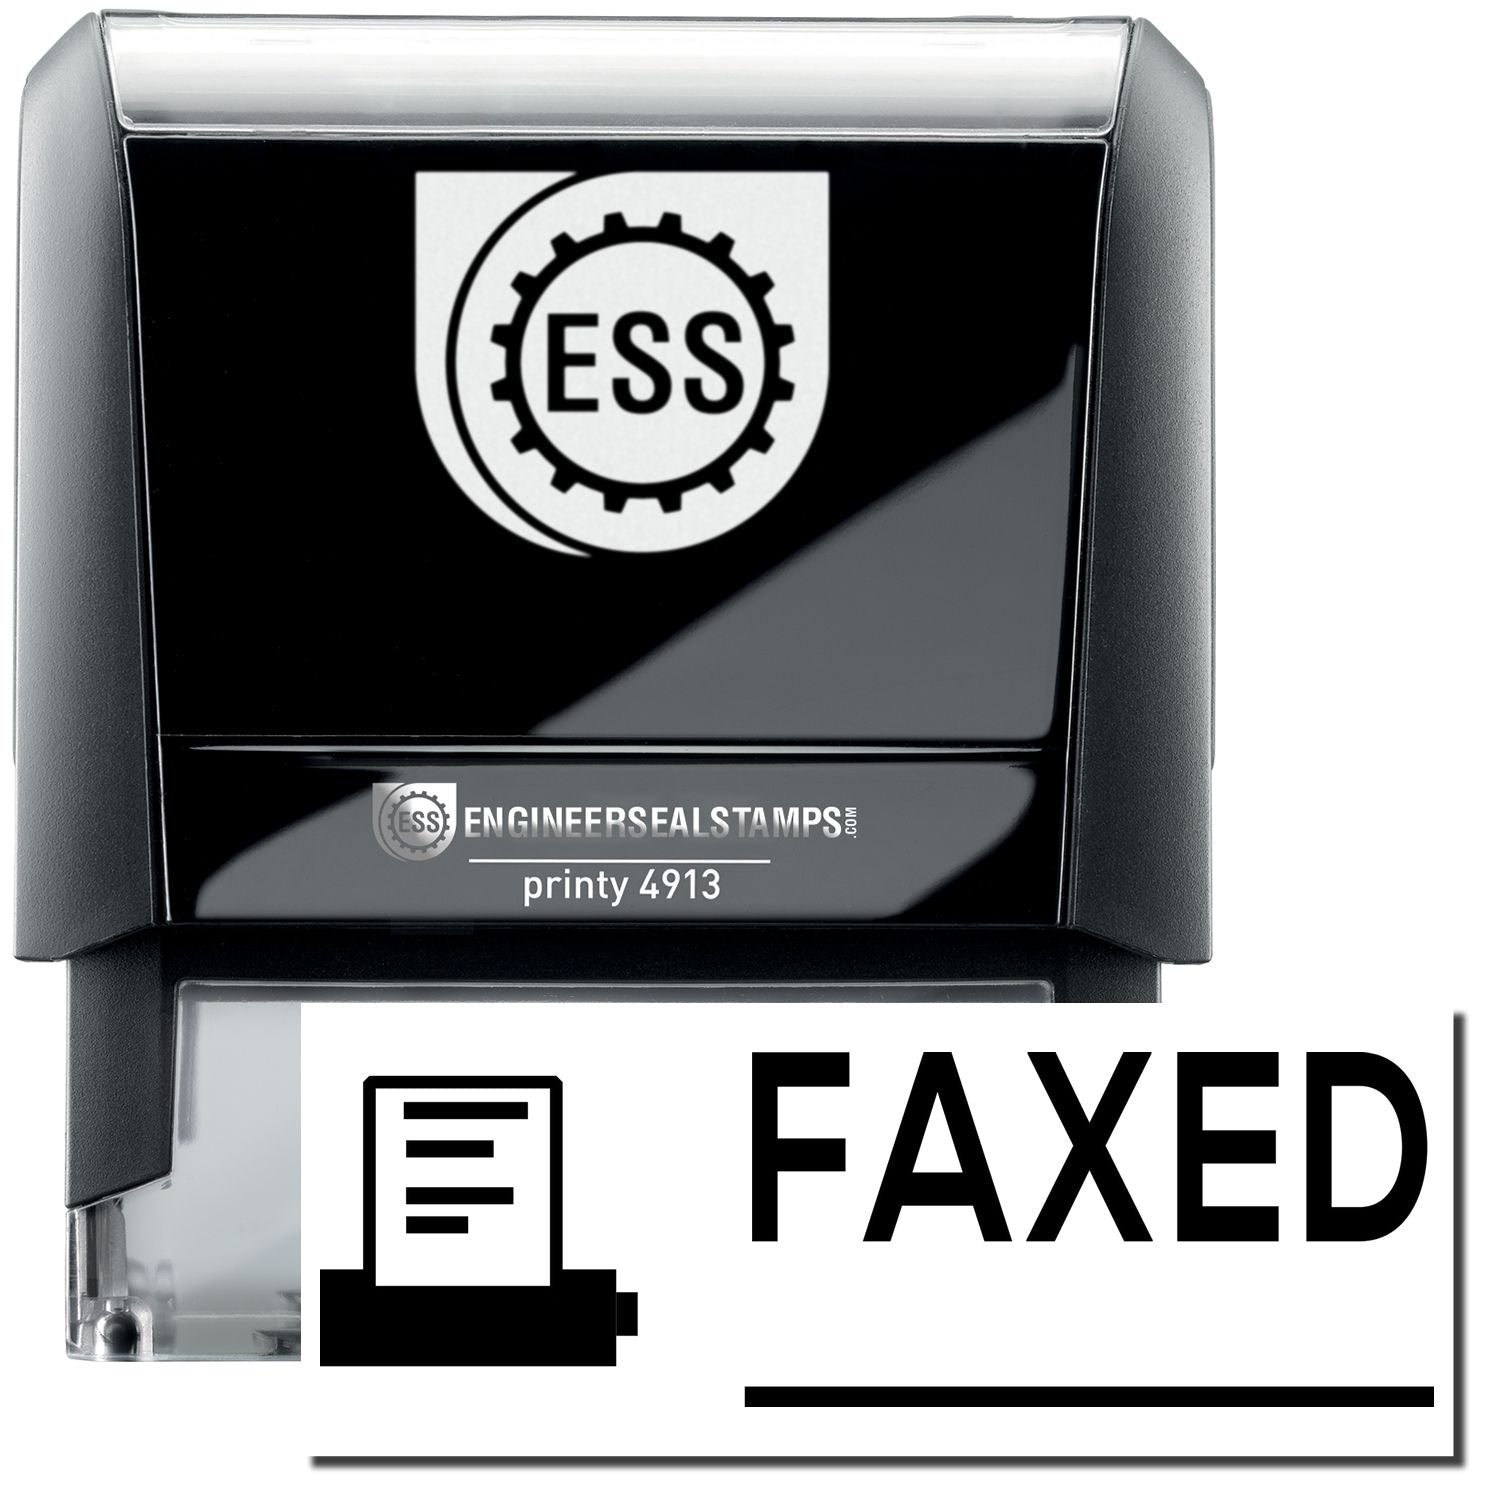 A self-inking stamp with a stamped image showing how the text "FAXED" in a large font with a line underneath and a small image of a fax machine on the left side is displayed after stamping.